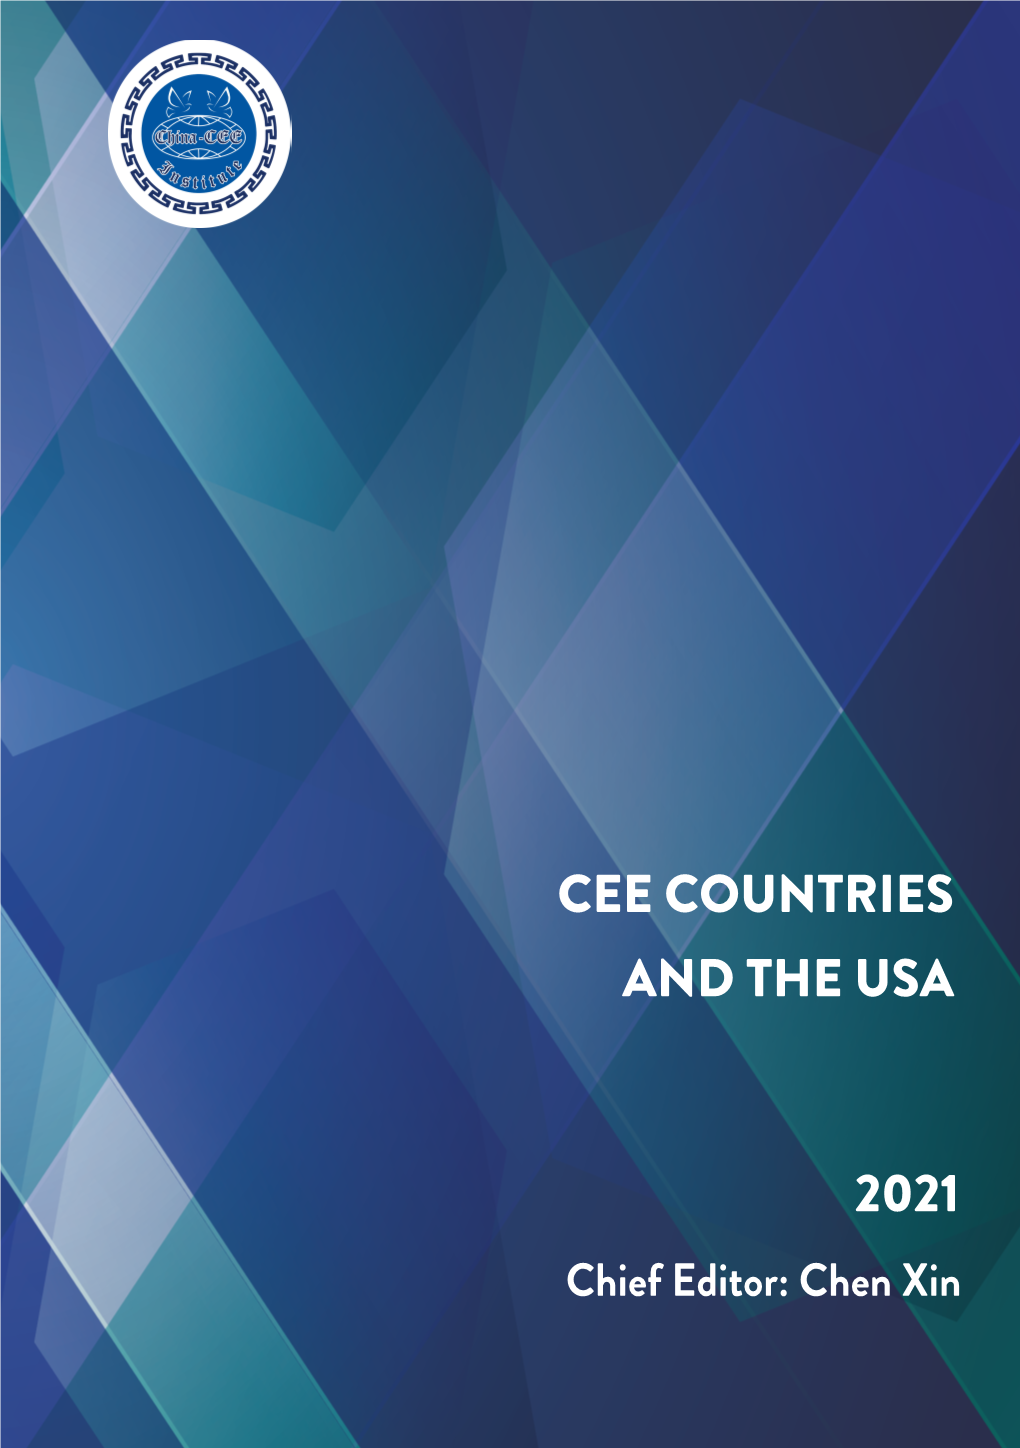 2021 Cee Countries and The